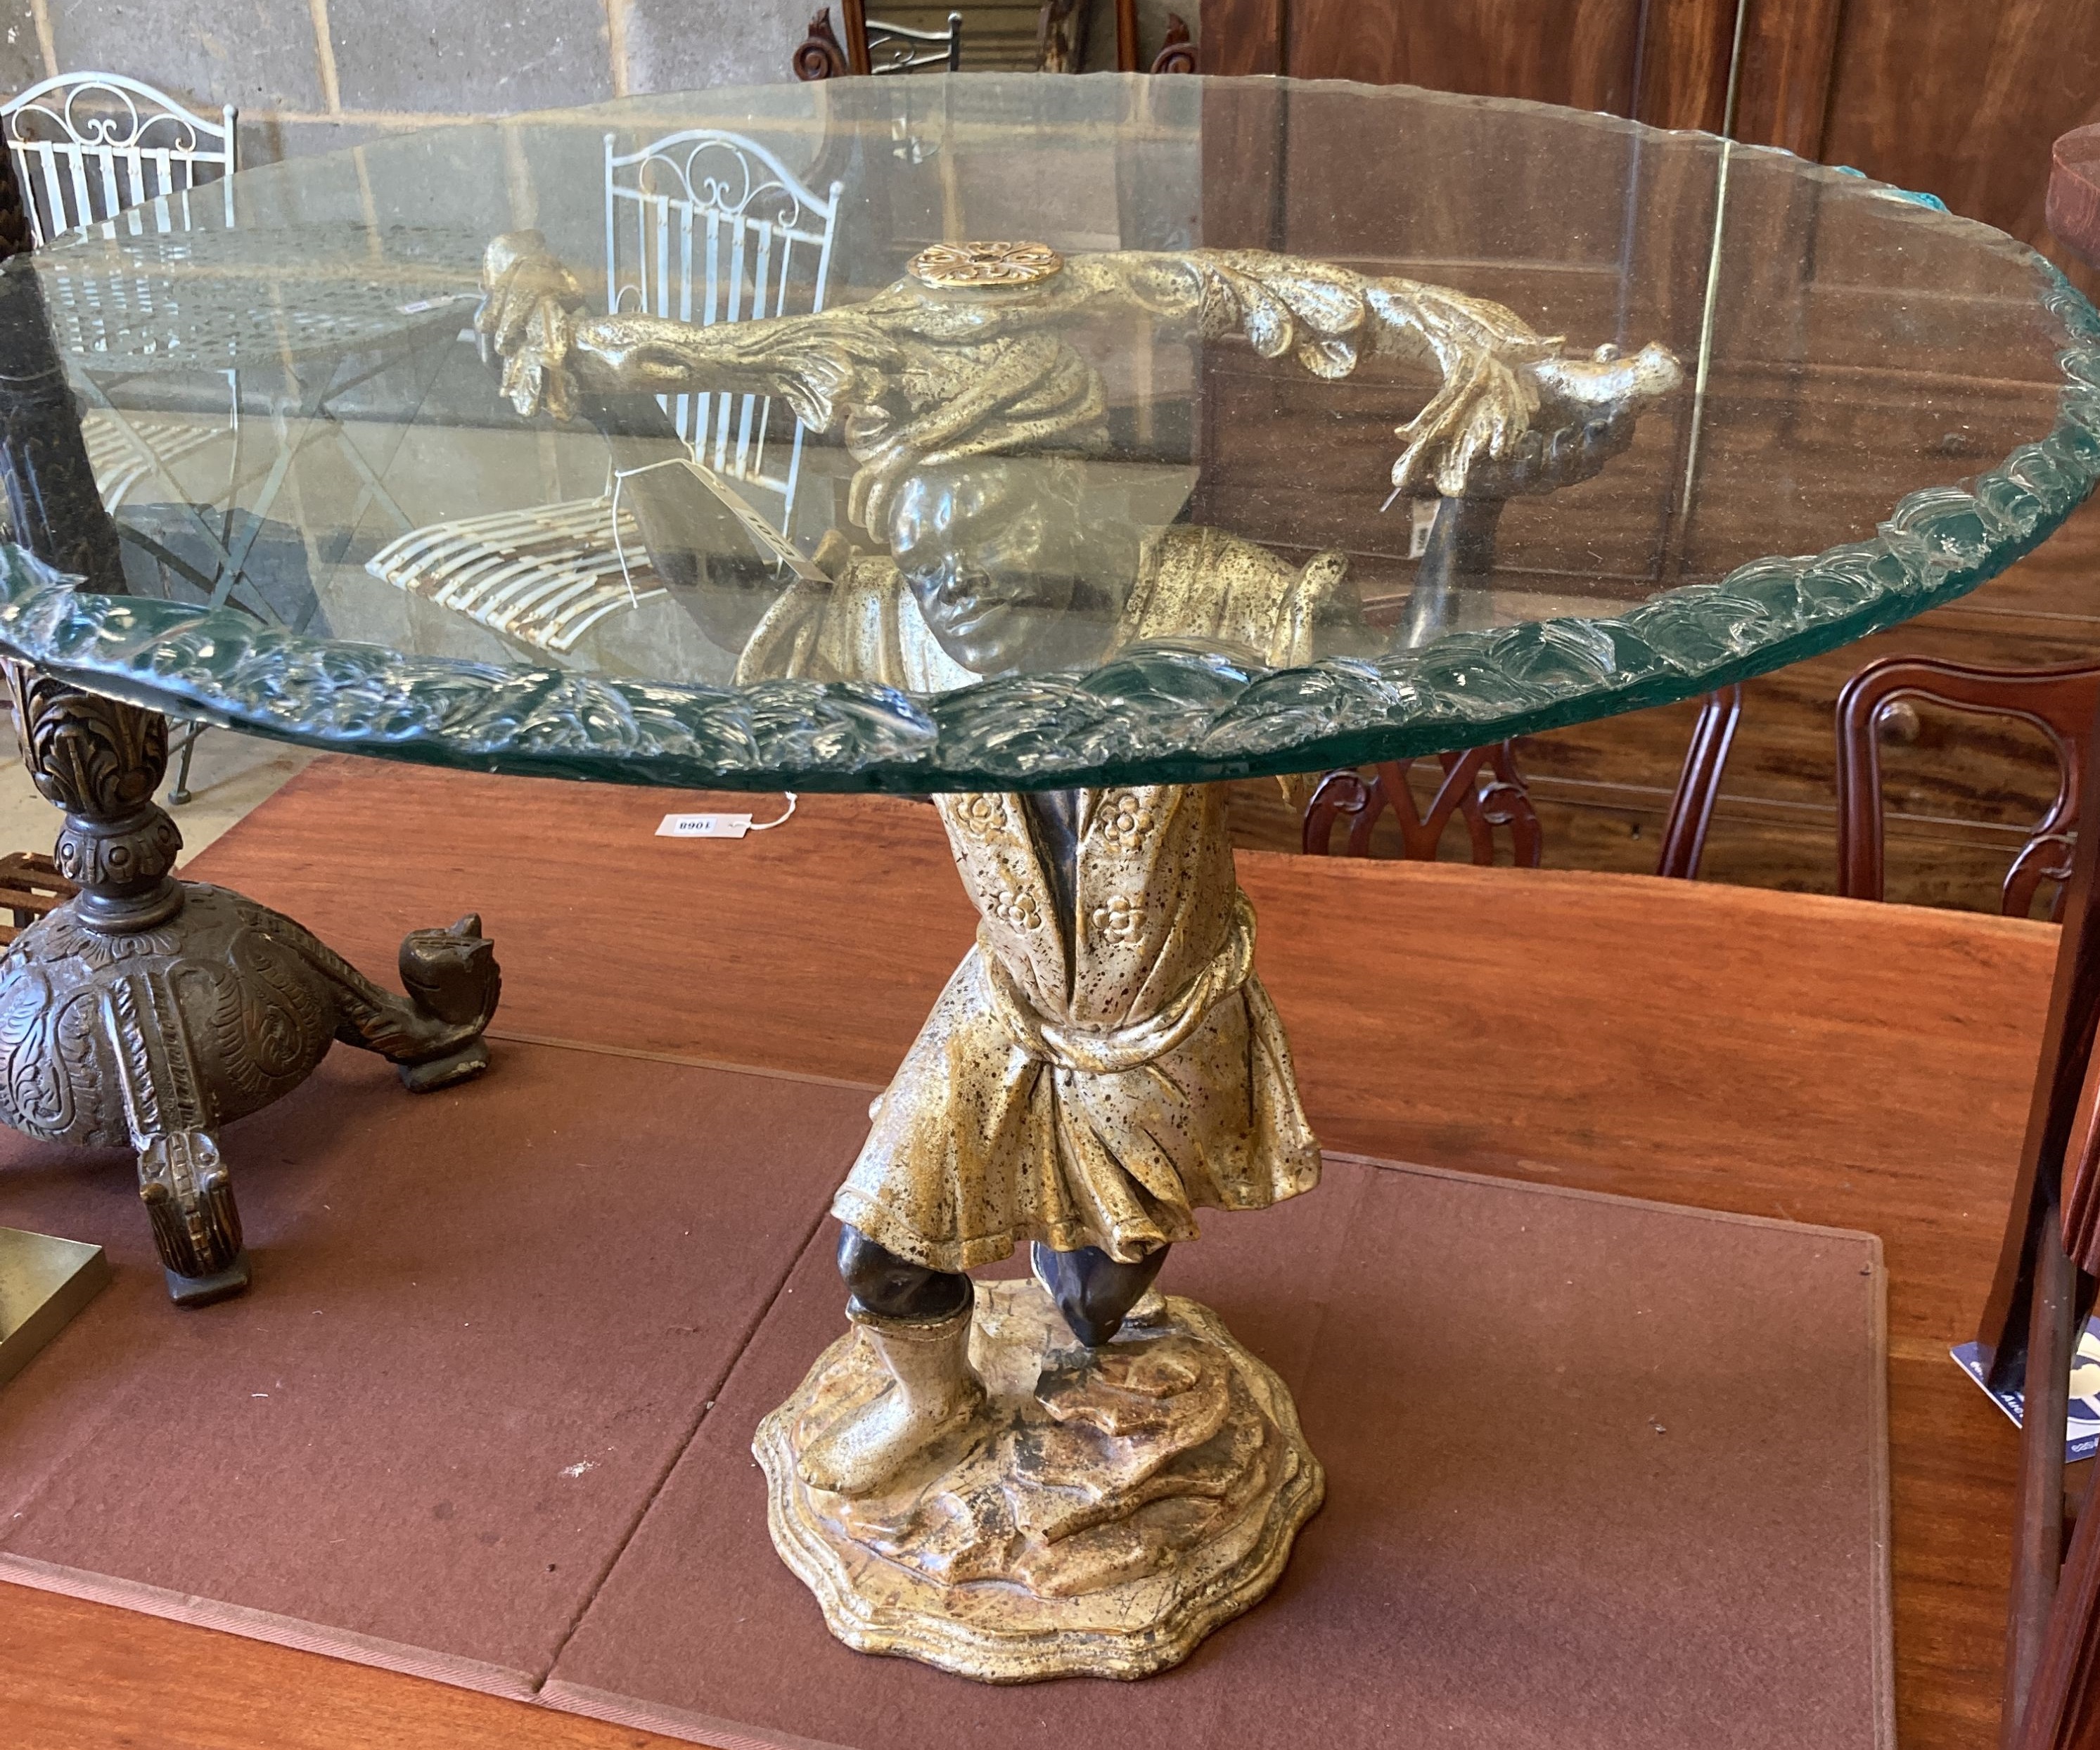 A reproduction Blackamoor table with circular glass top, diameter 80cm, height 63cm